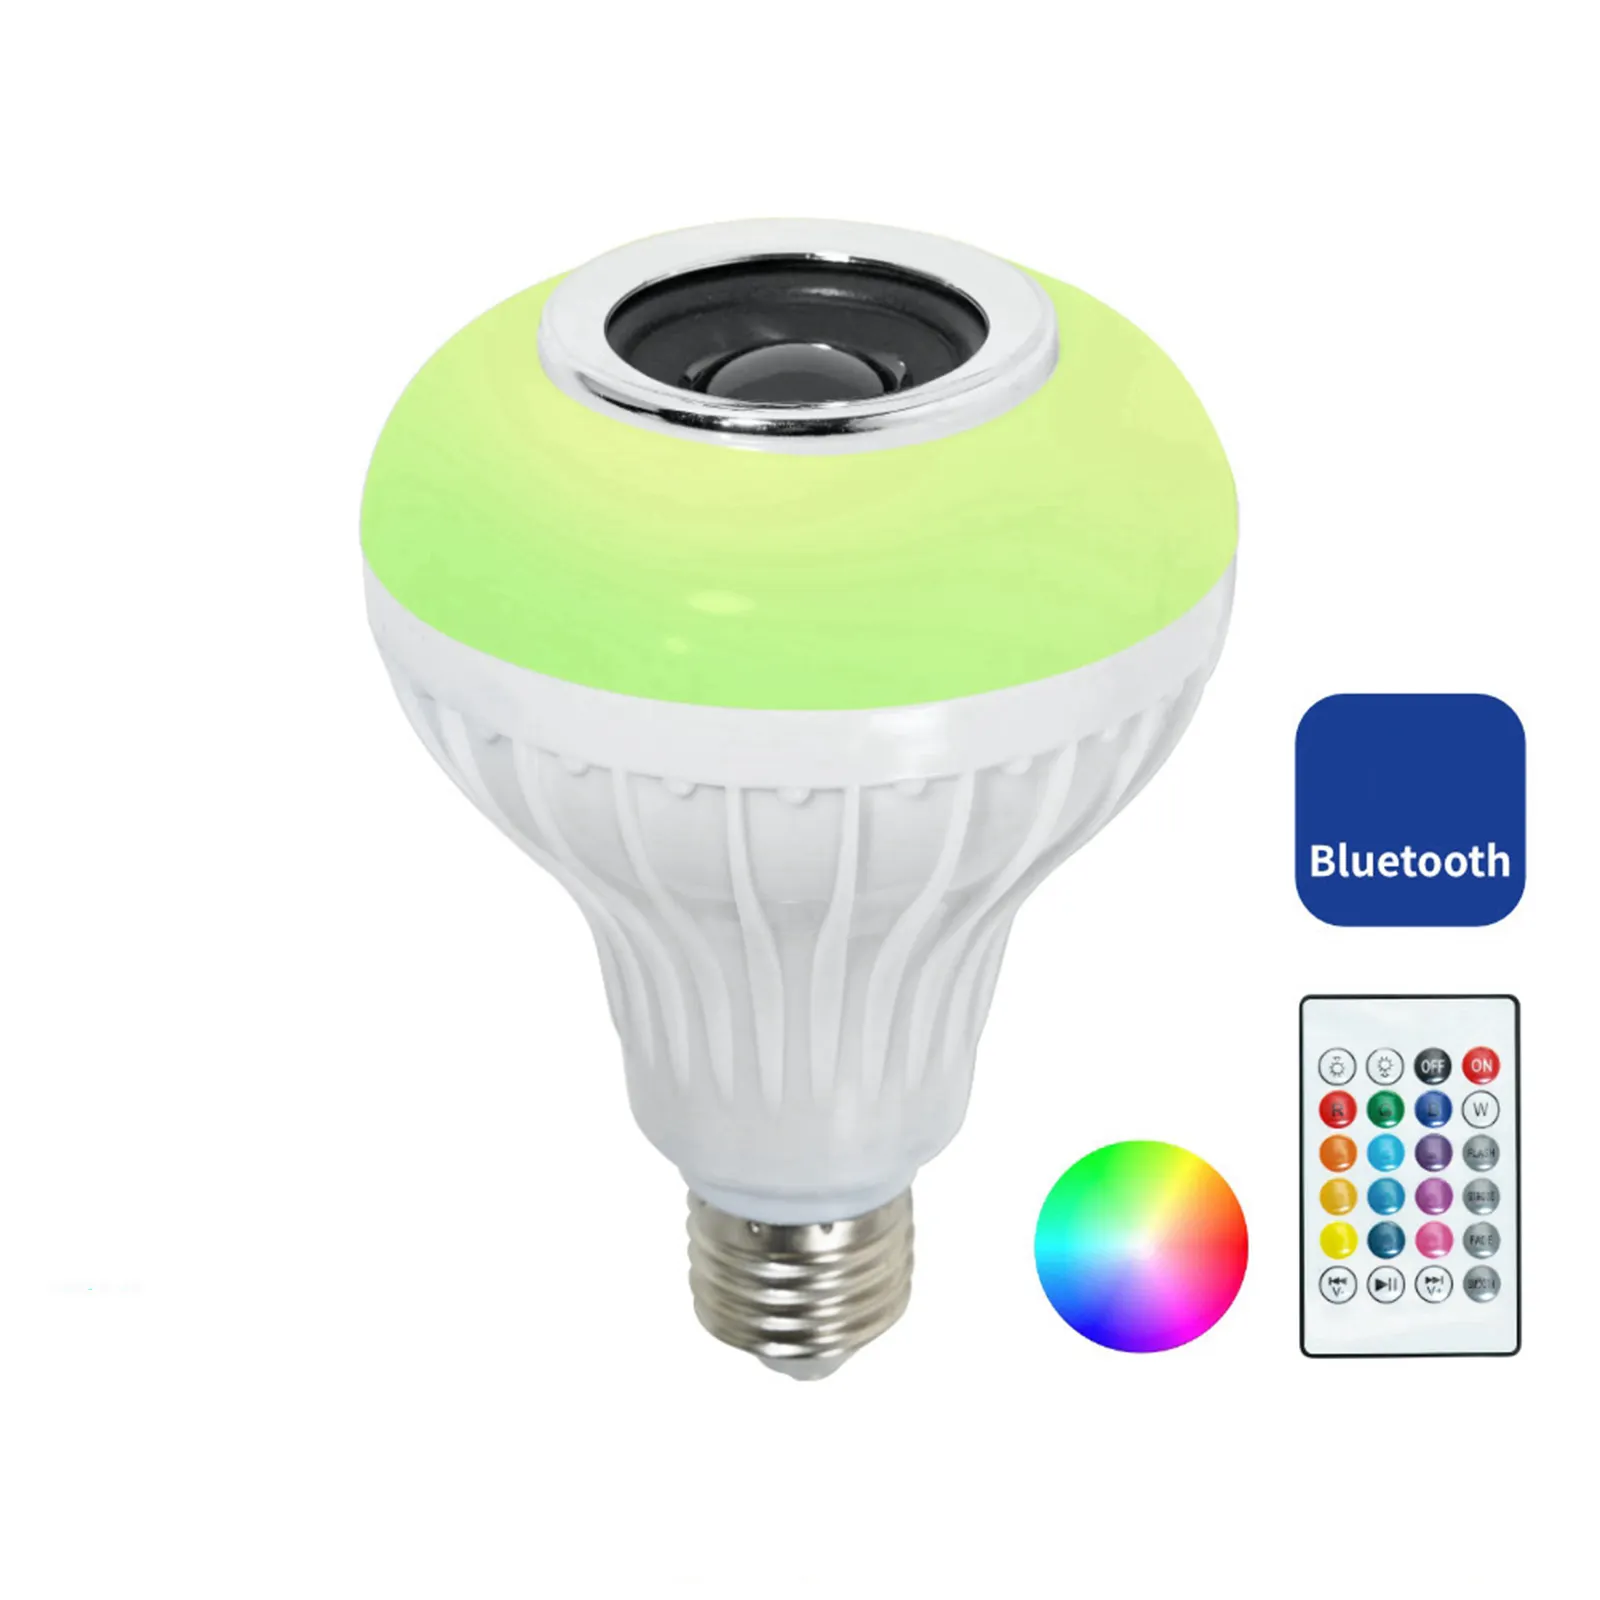 LED Wireless Light Bulb Speaker RGB Smart Music Bulb with Remote Control